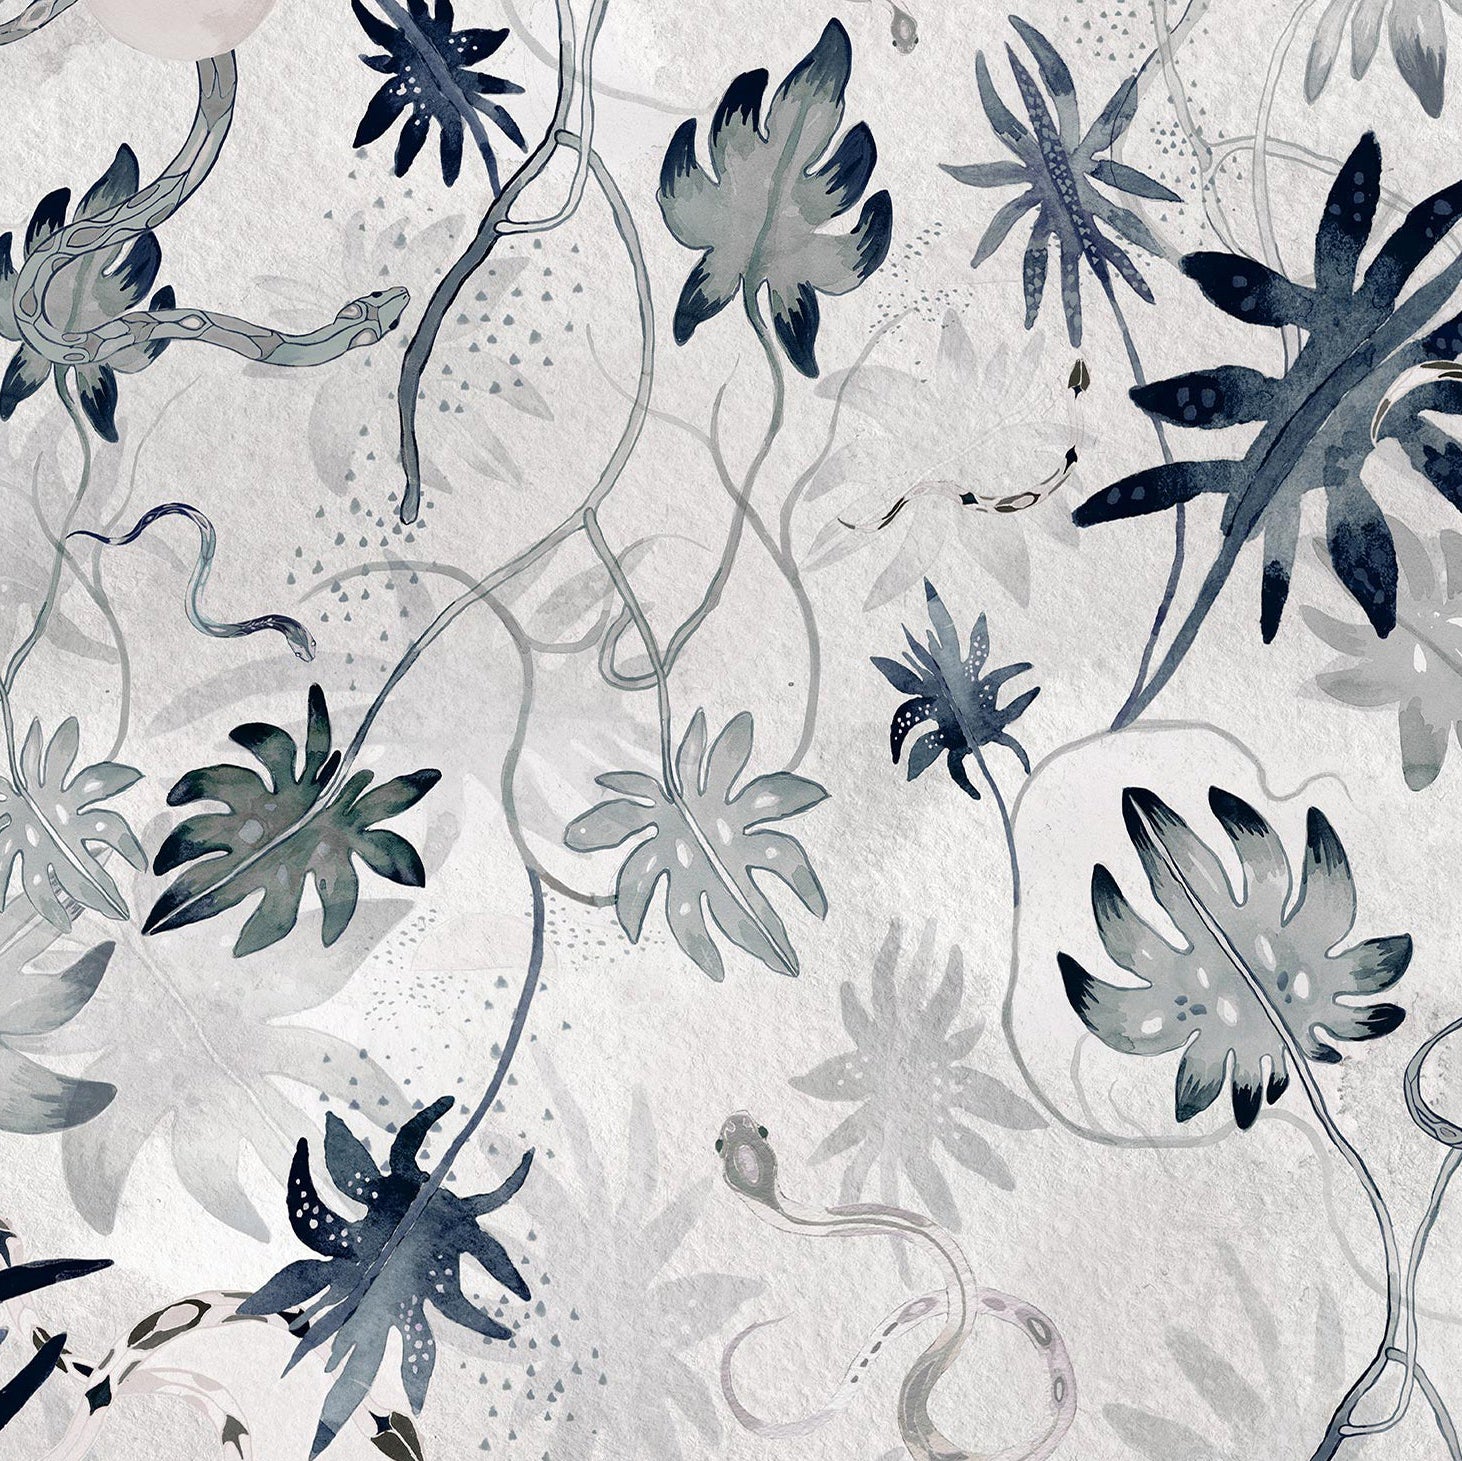 Detail of wallpaper in a playful leaf and snake print in gray and navy on a cream field.